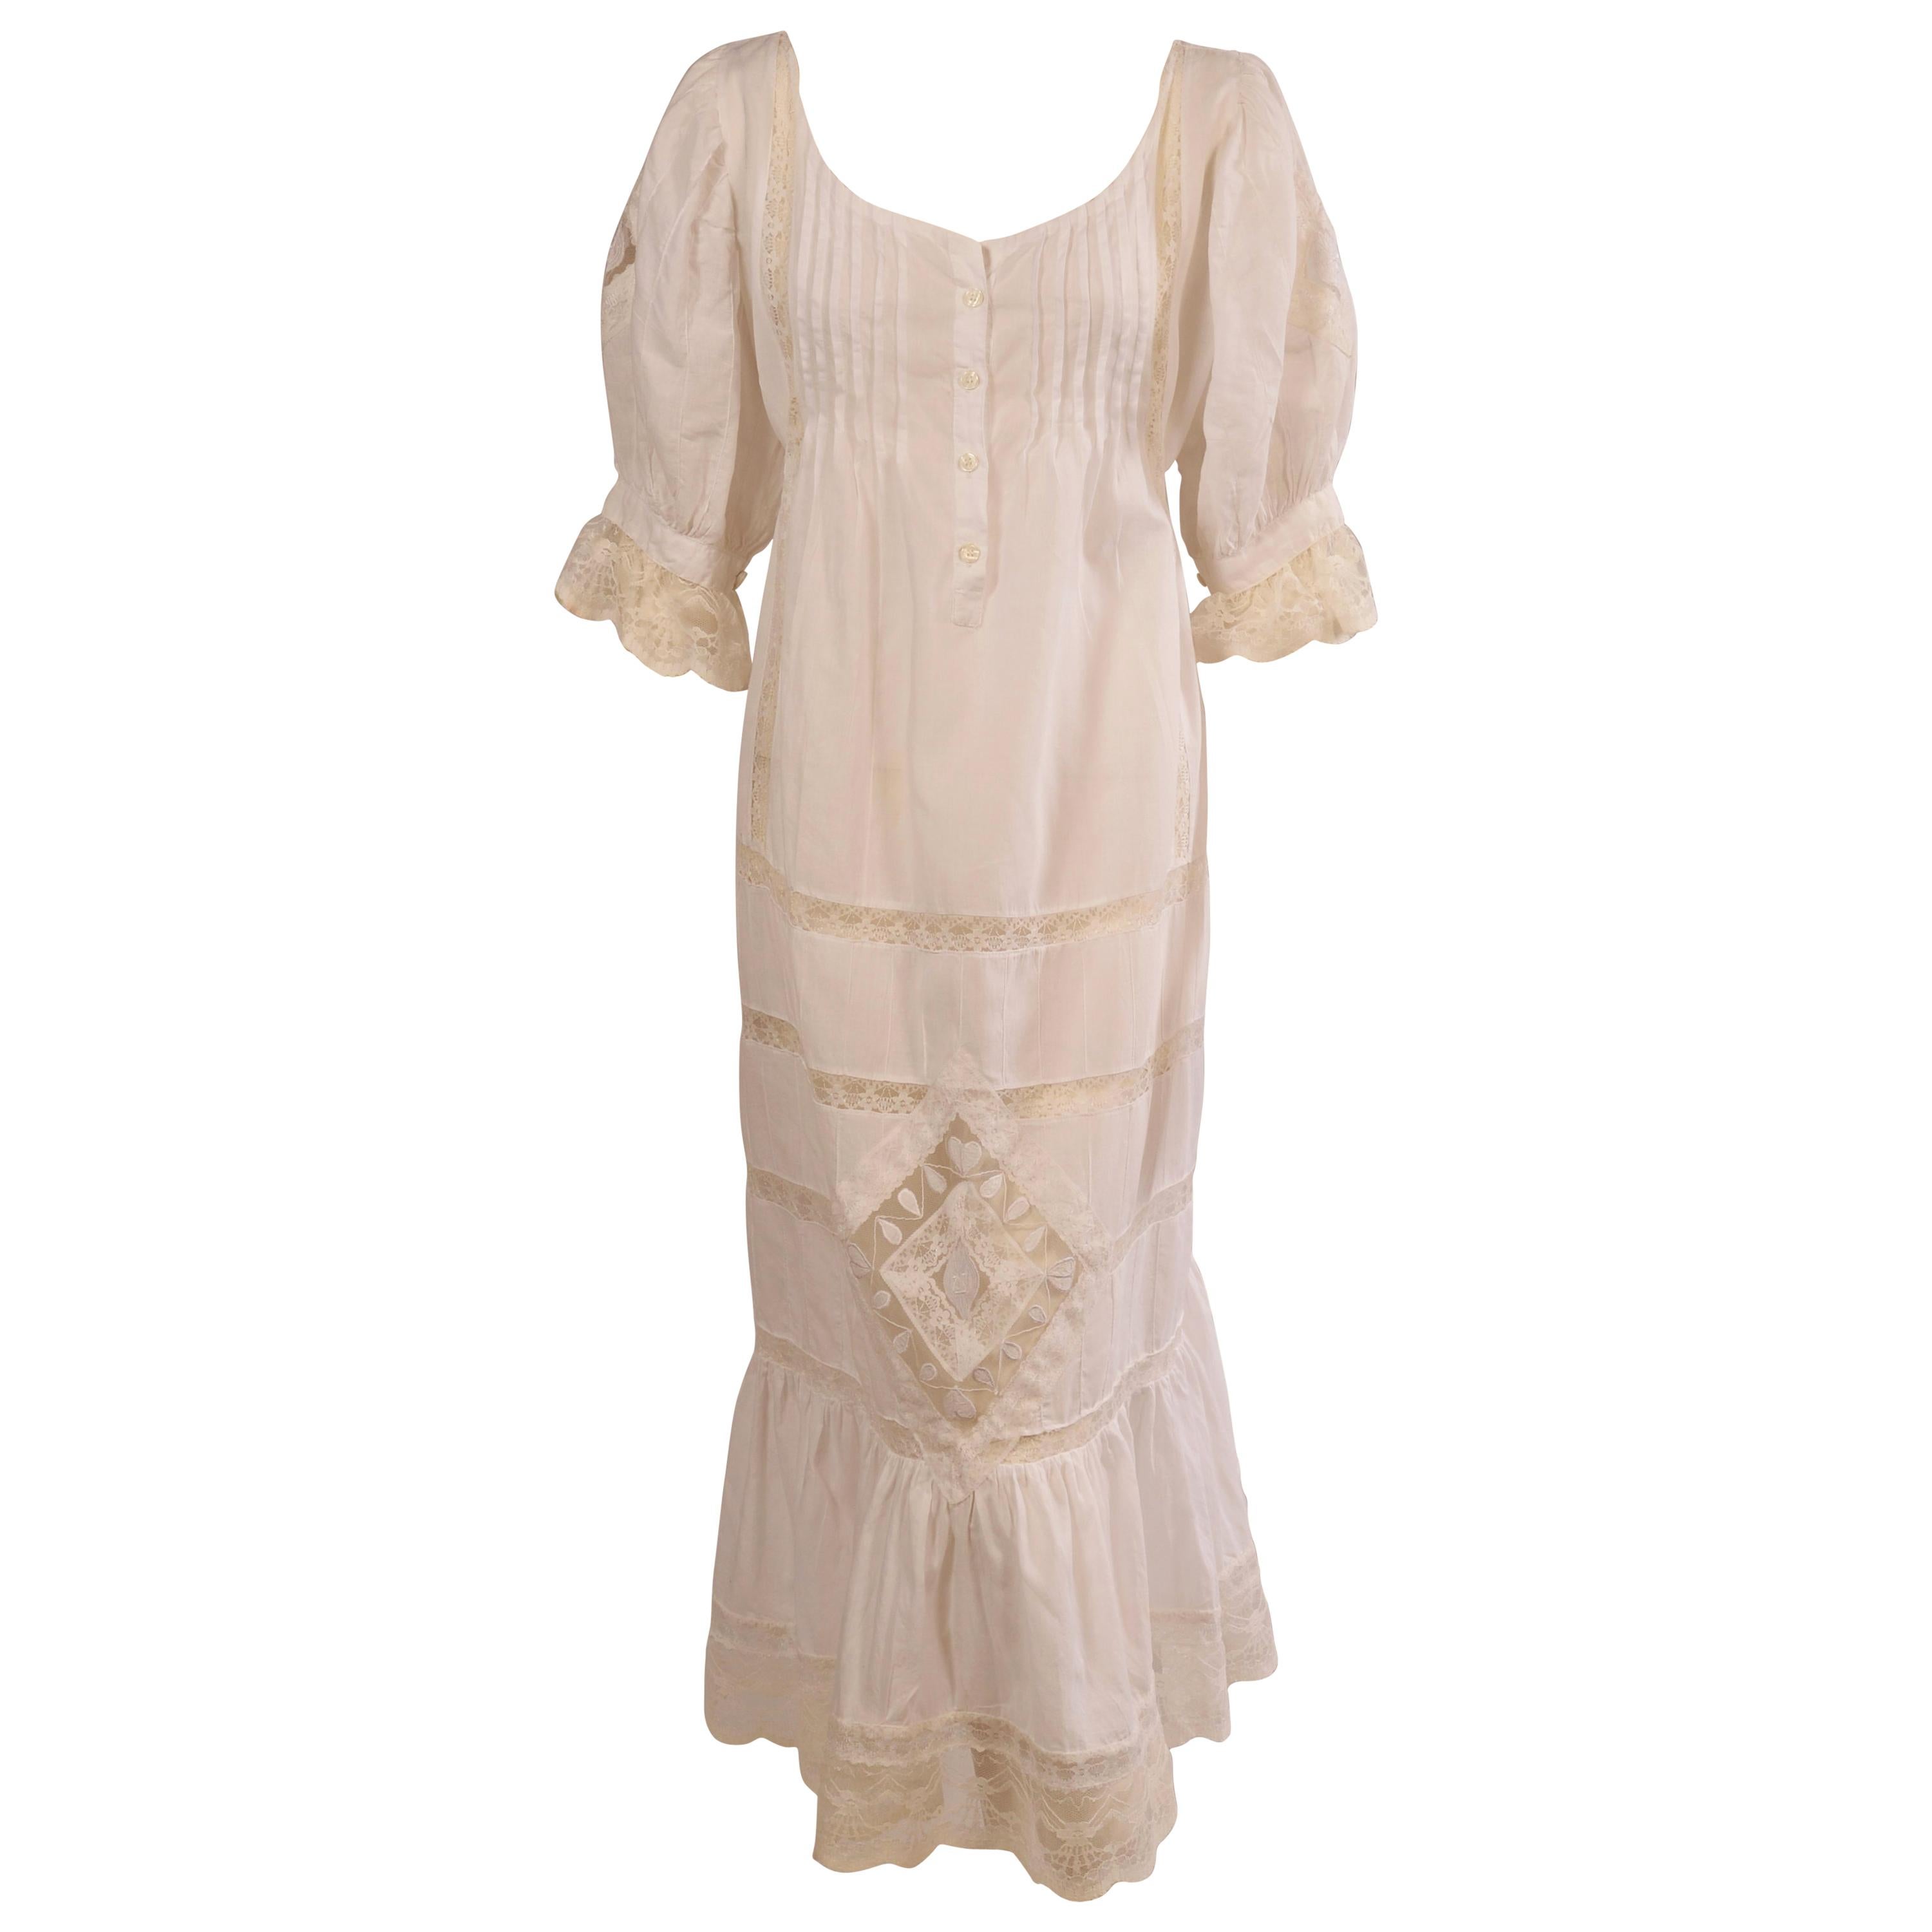 Victorian Inspired White Cotton and Lace Dress circa 1980 For Sale at ...